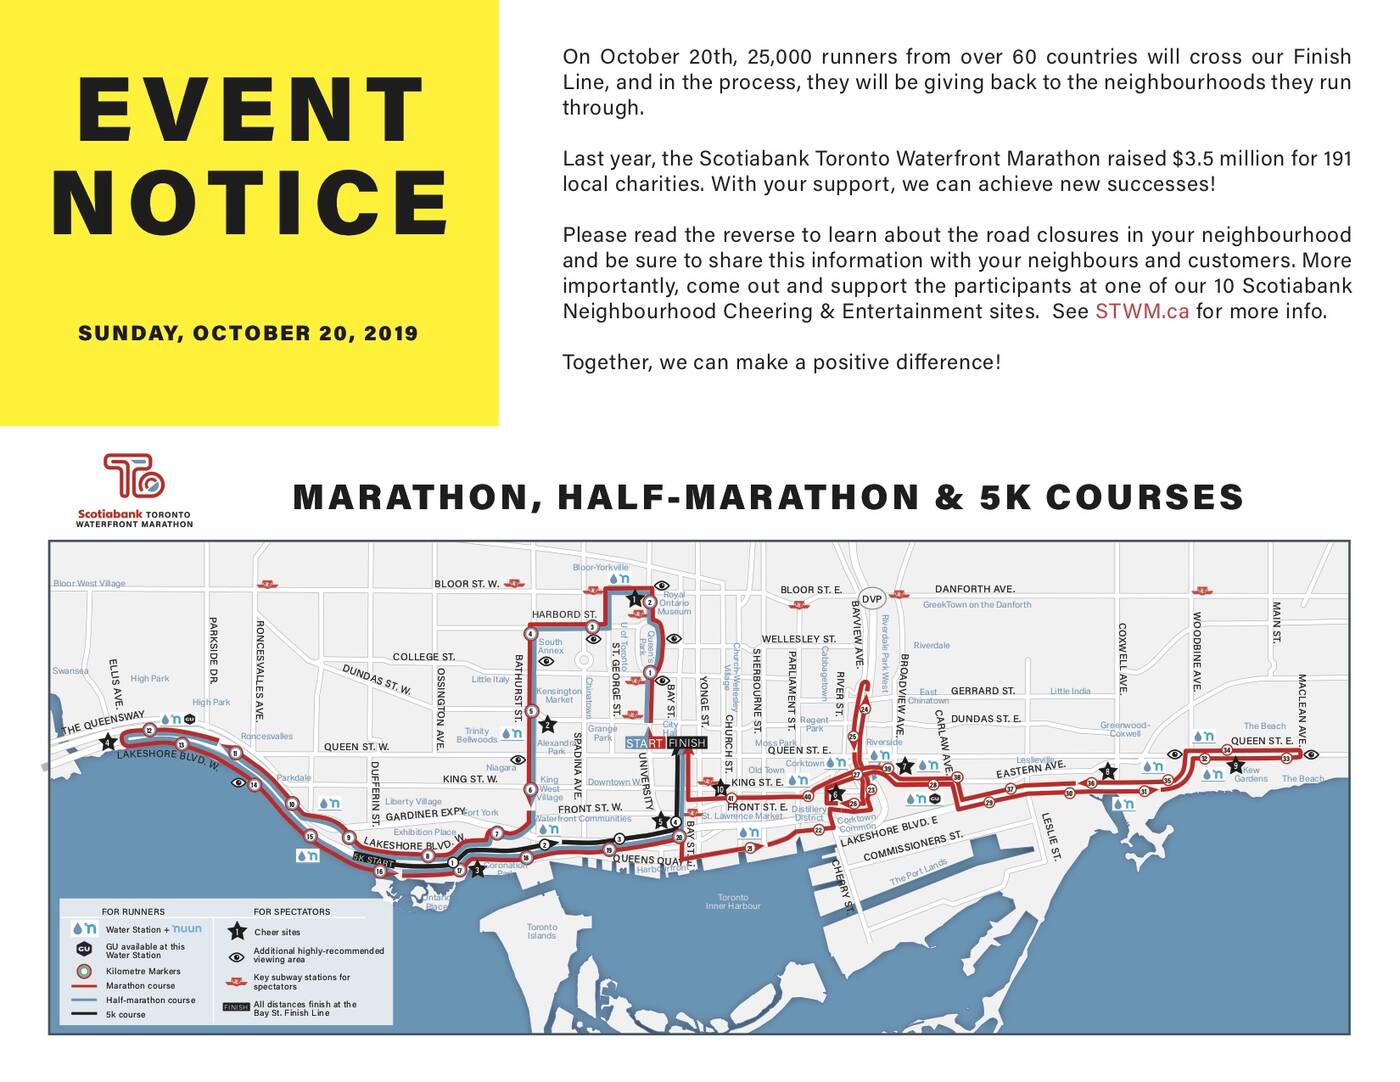 Scotiabank Toronto Waterfront Marathon road closures and route info for